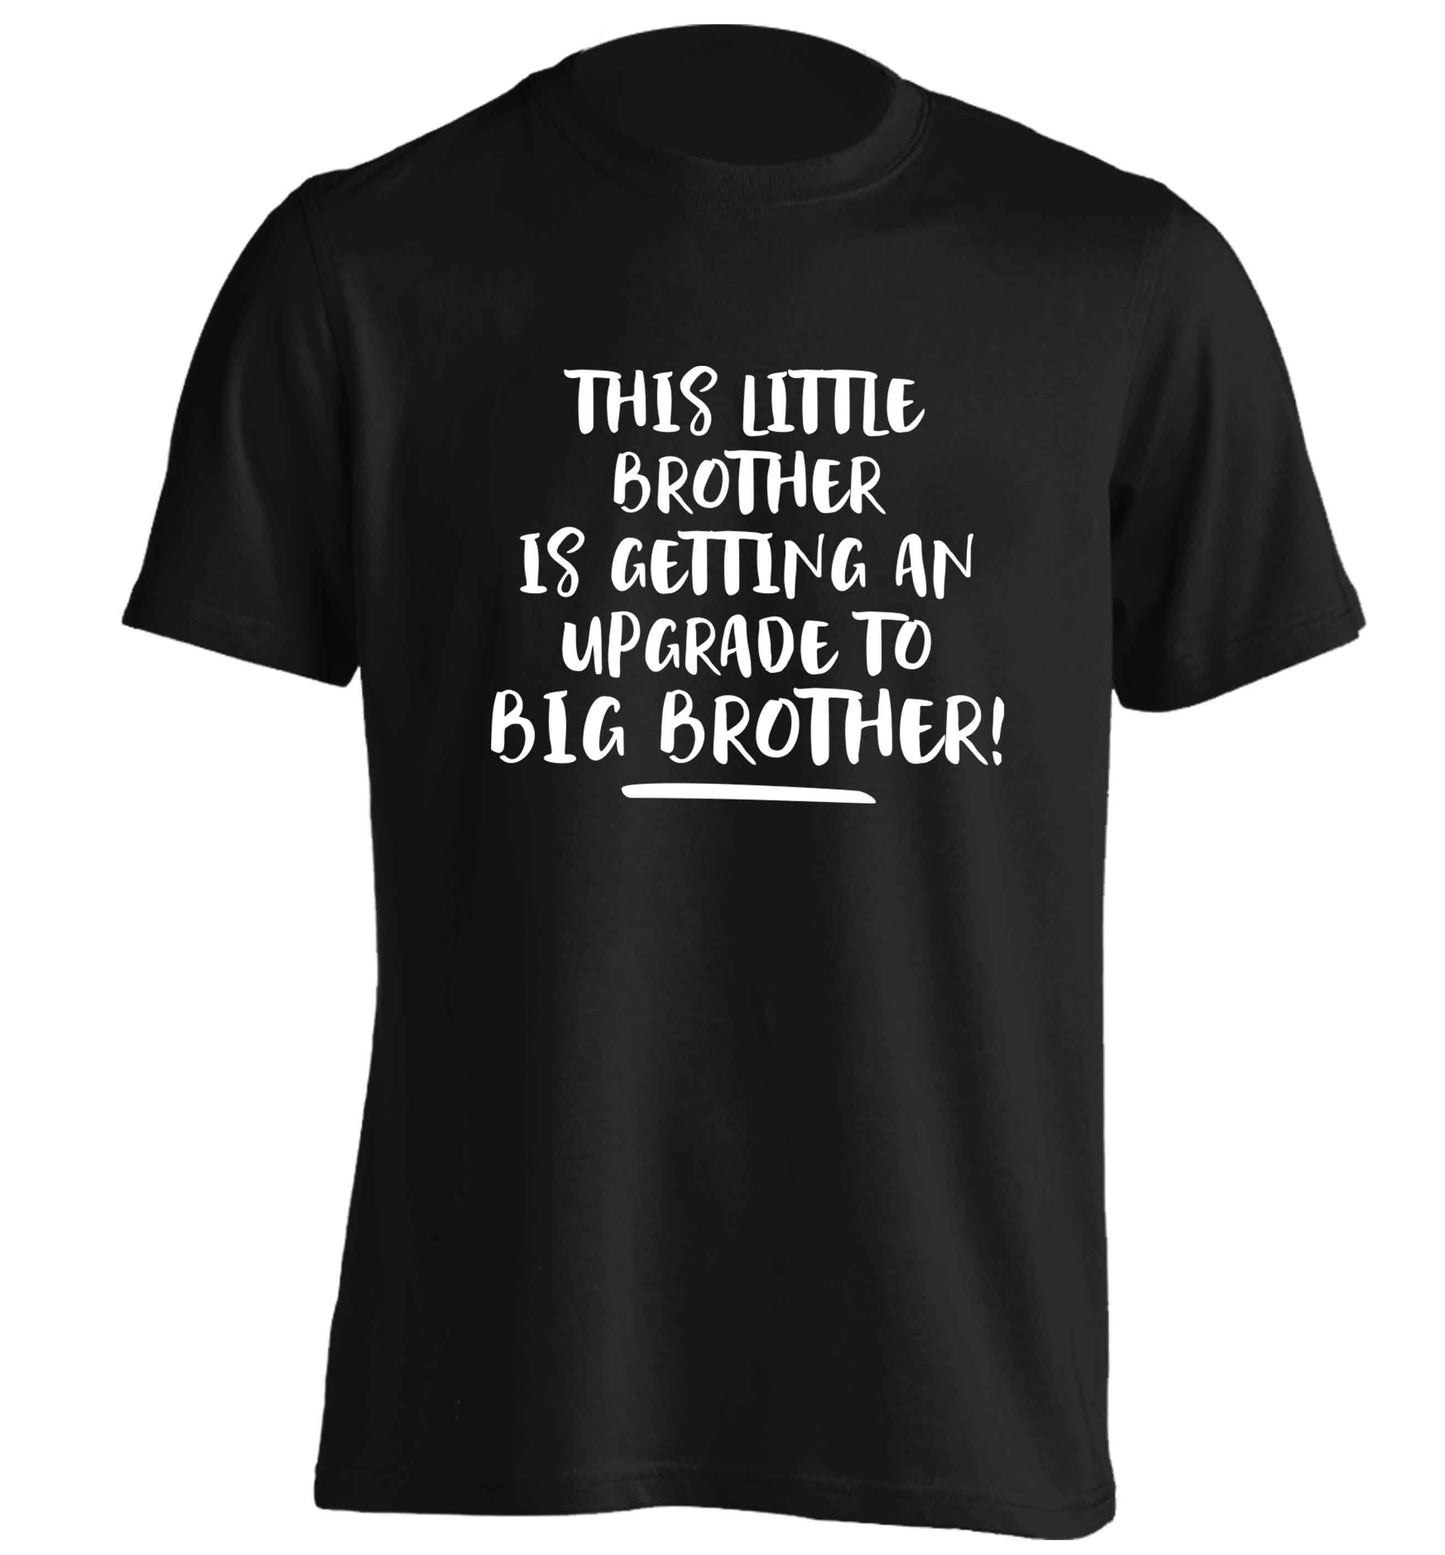 This little brother is getting an upgrade to big brother! adults unisex black Tshirt 2XL